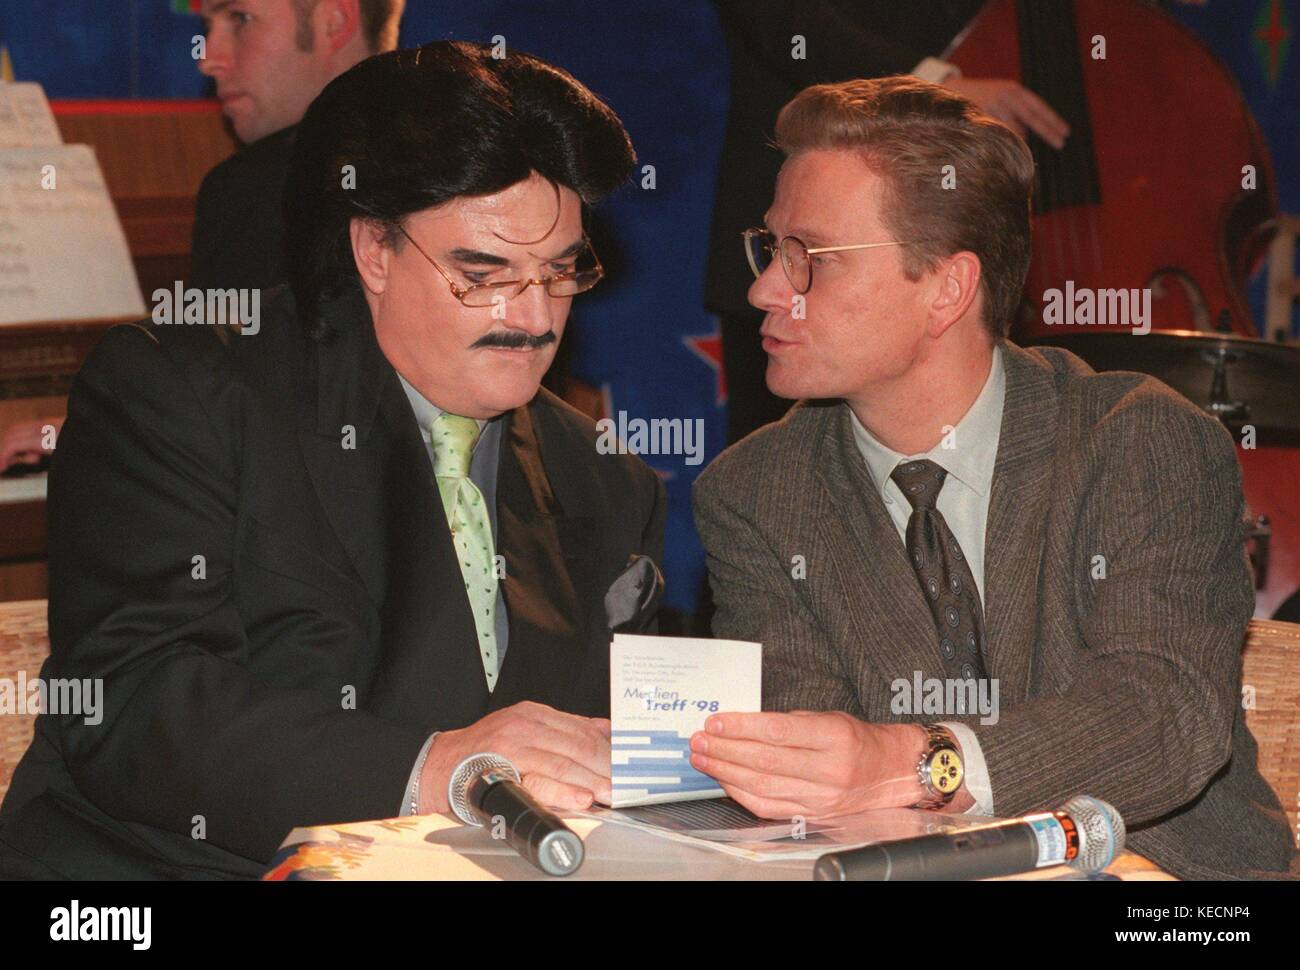 German politican Guido Westerwelle (R) and fashion designer Rudolph Moshammer are meeting at the media convention on 14 January 1998 in Bonn (North-Rhine Westphalia, Germany).  | usage worldwide Stock Photo